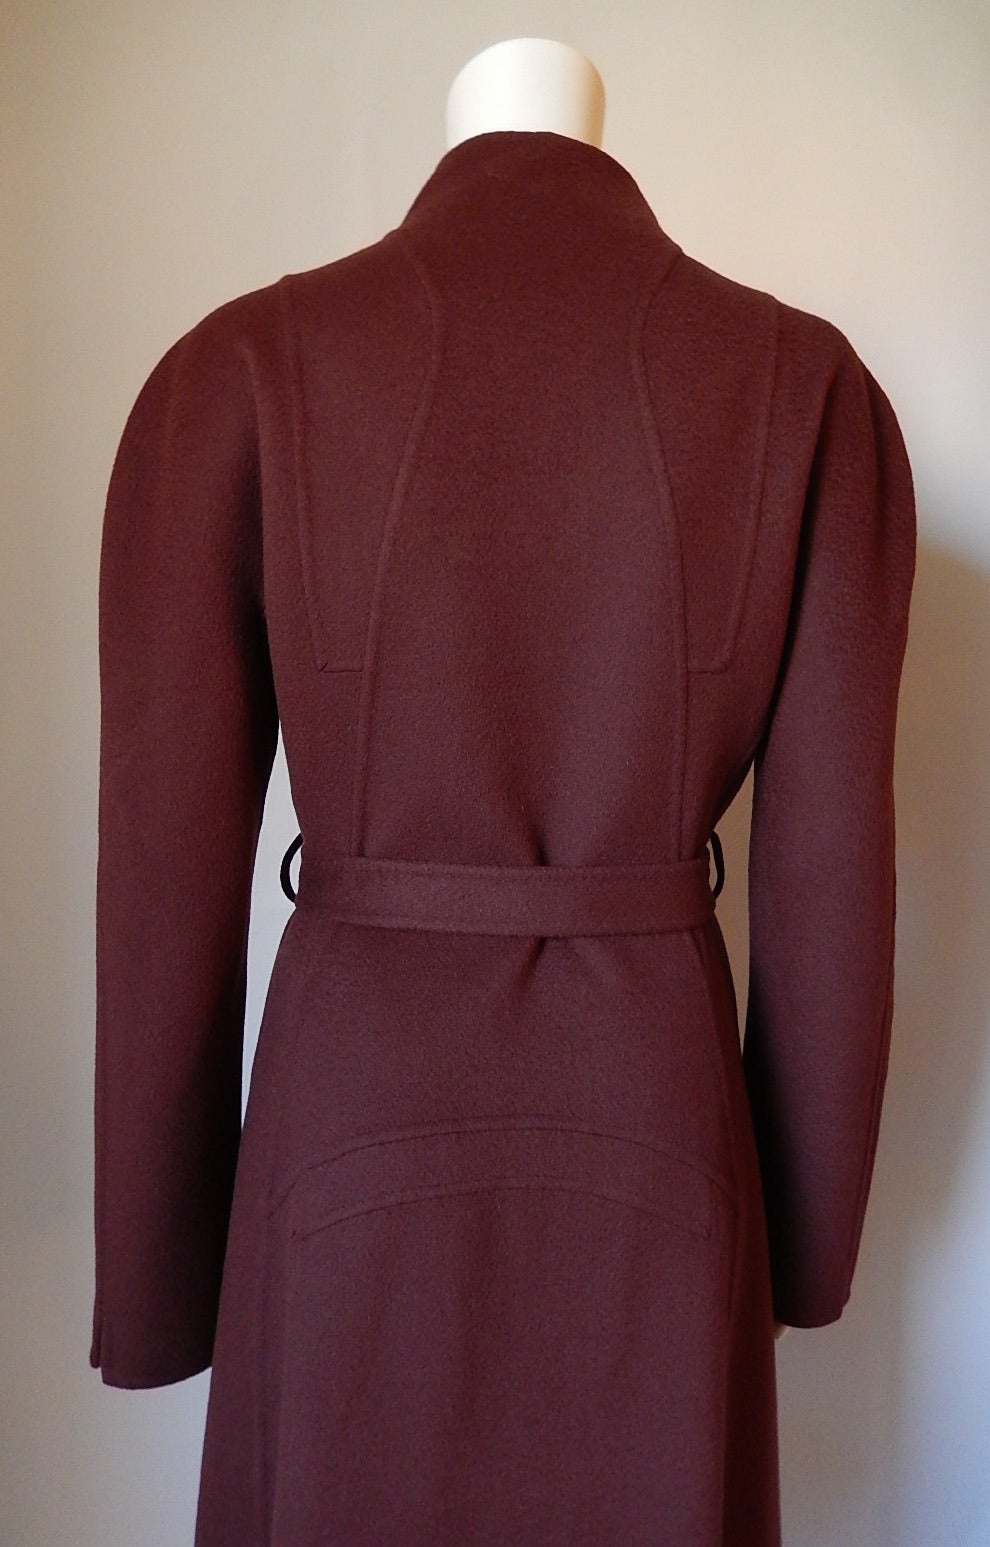 Chado Ralph Rucci 100% Double Faced Cashmere Coat in Maroon For Sale 3